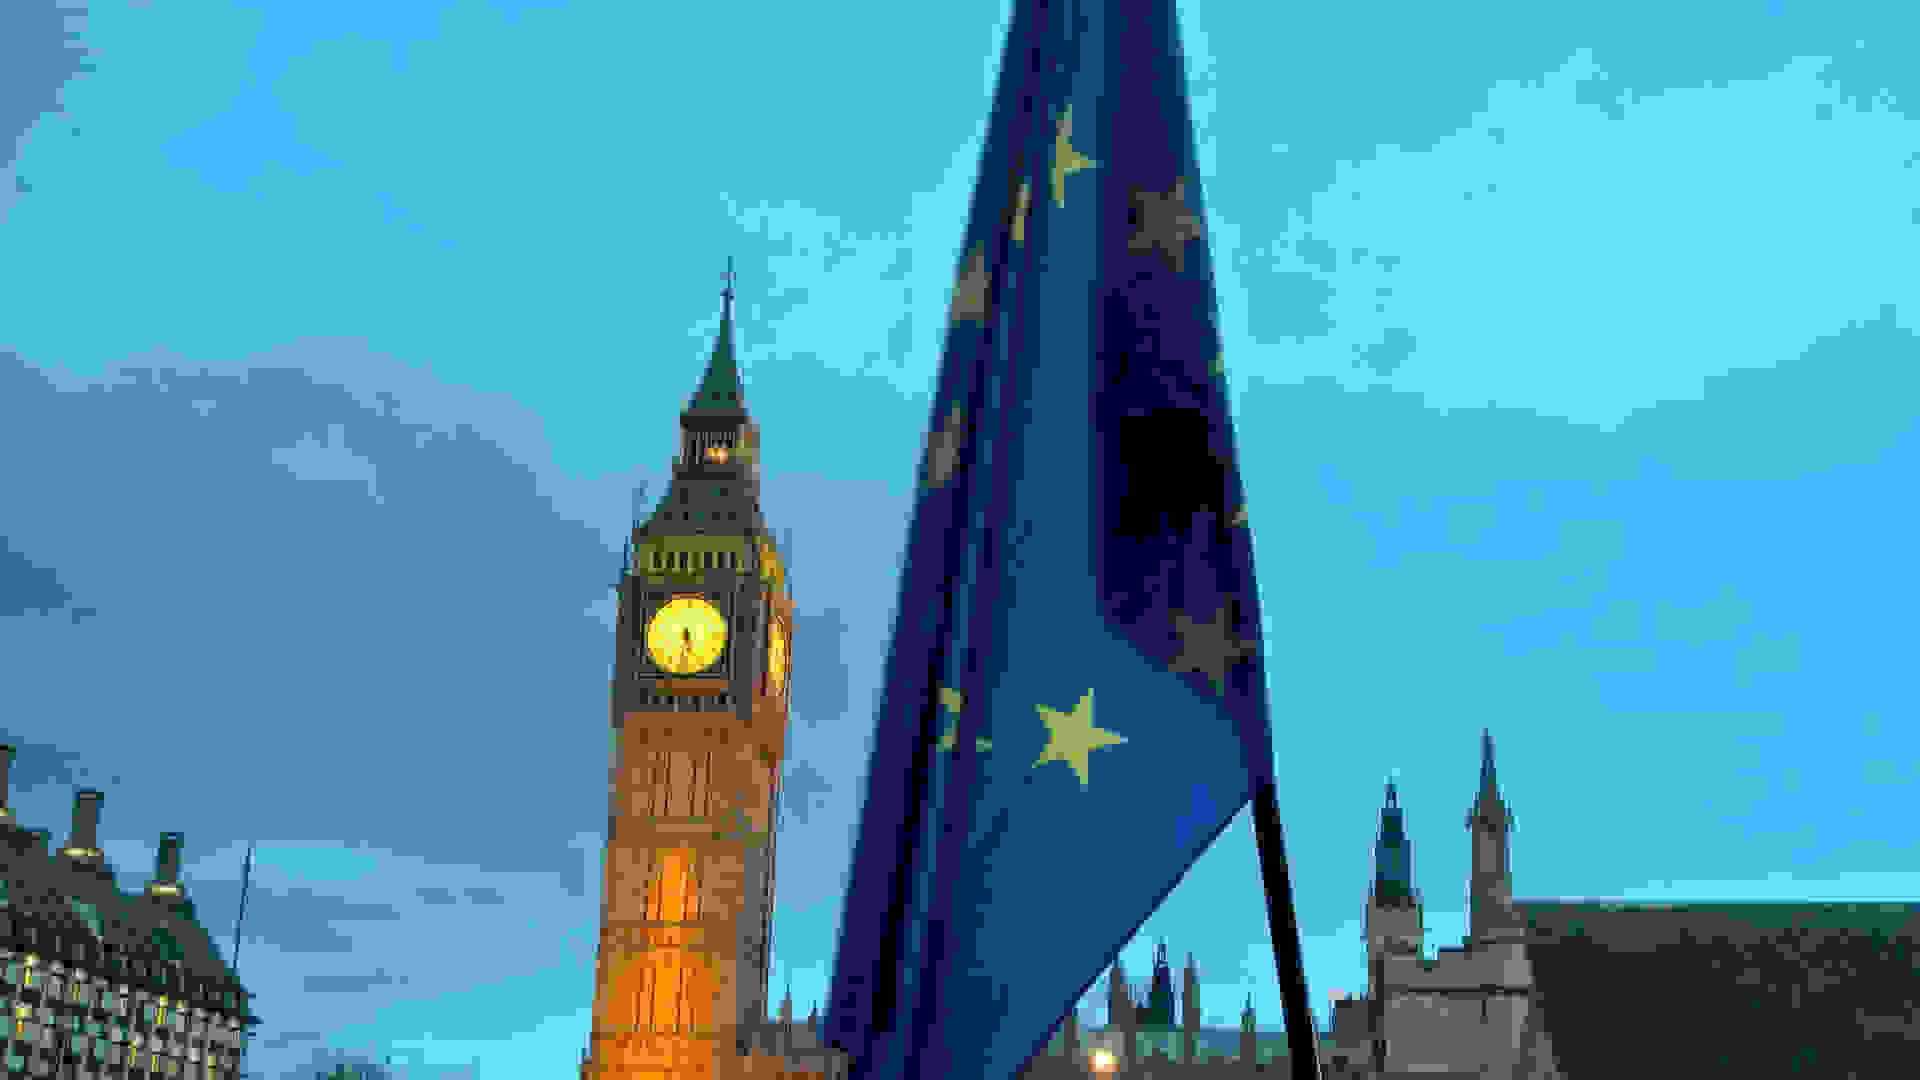 The EU flag in the foreground and Big Ben in the background during a protest in Parliament Square, Westinster.